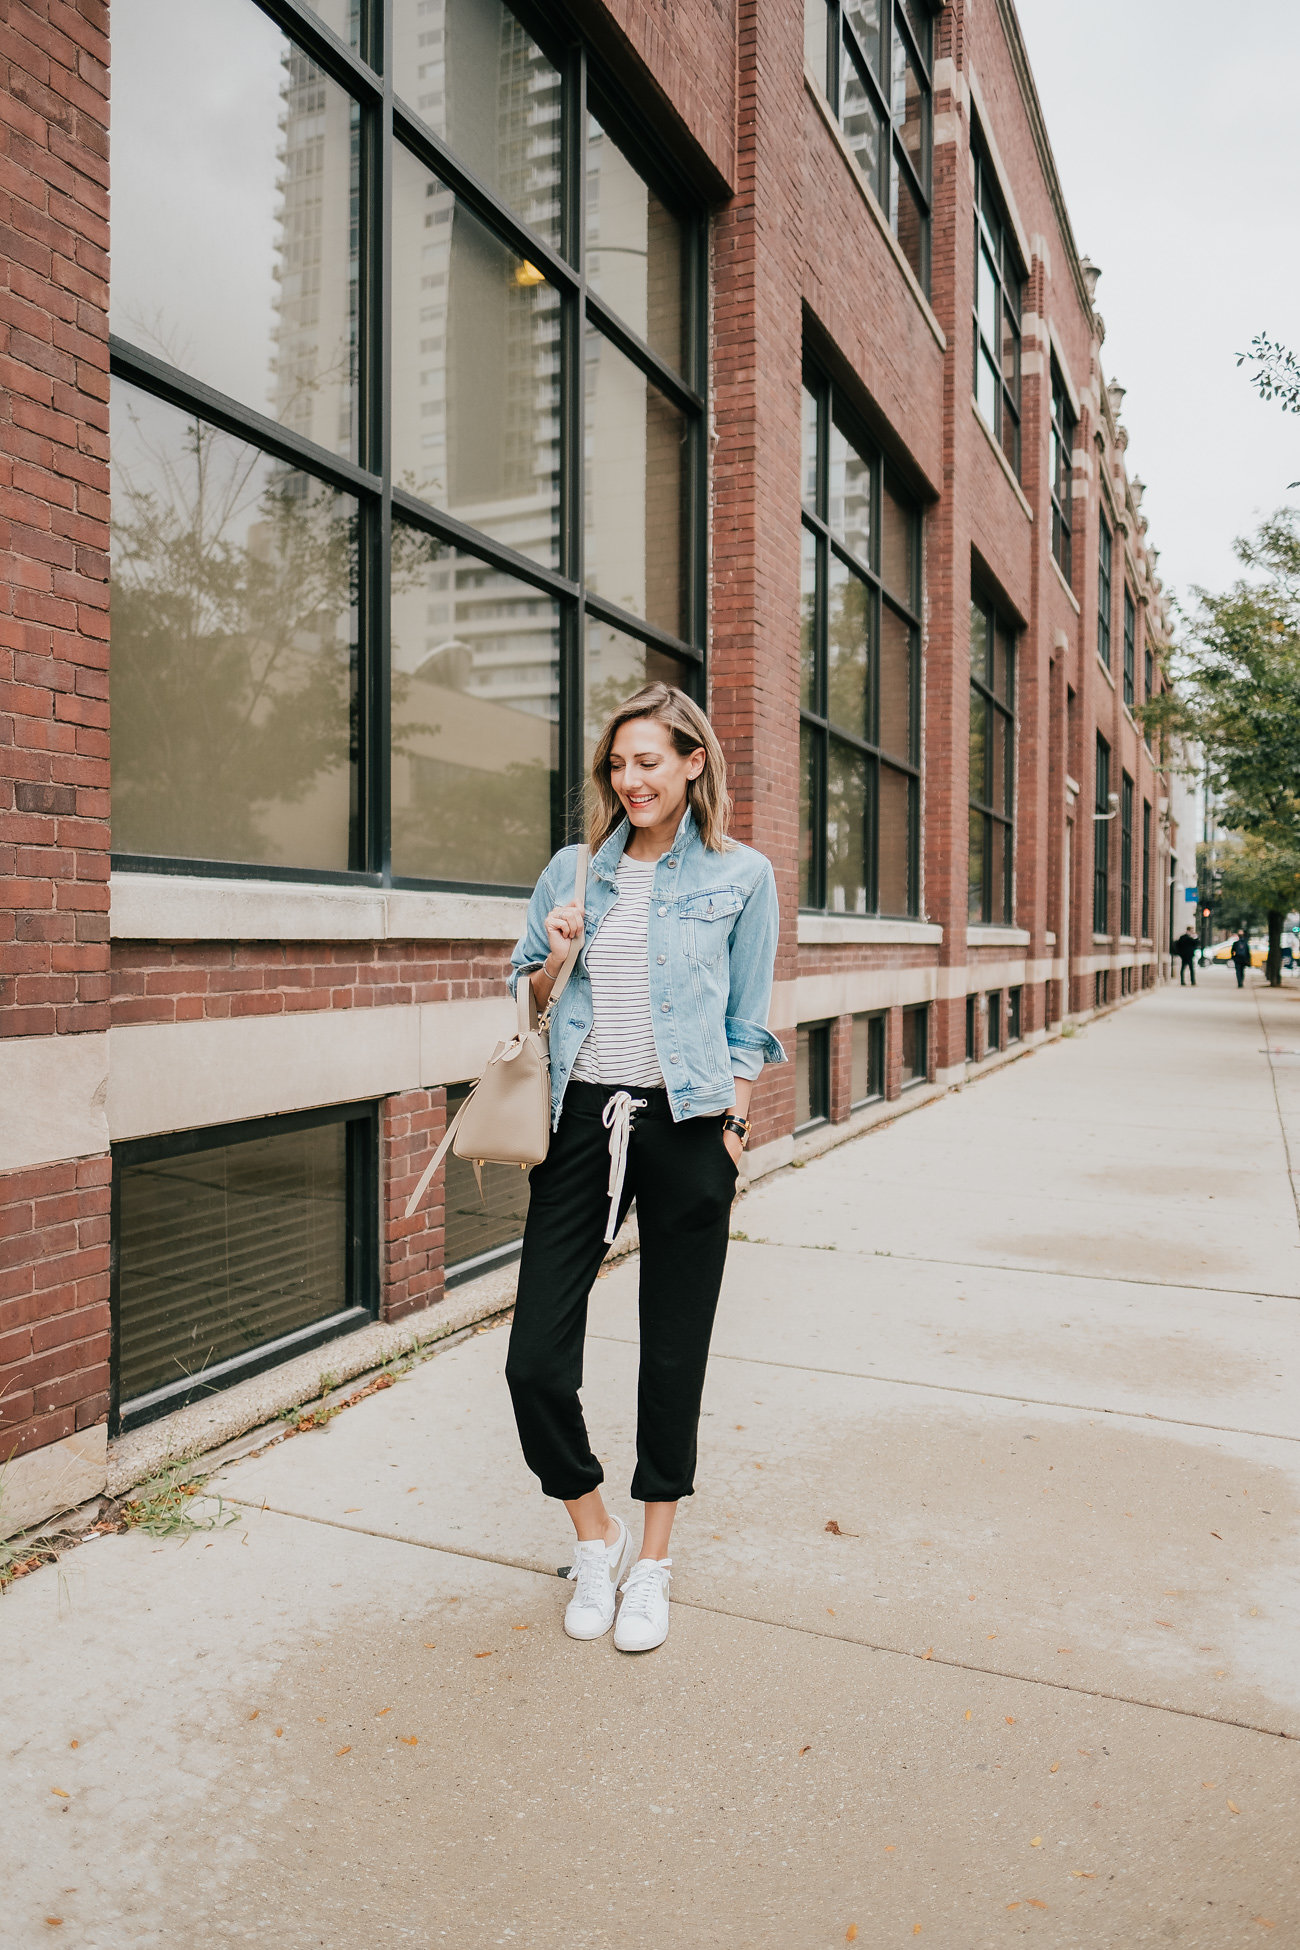 Athleisure Outfits For Moms - Later Ever After - A Chicago Based